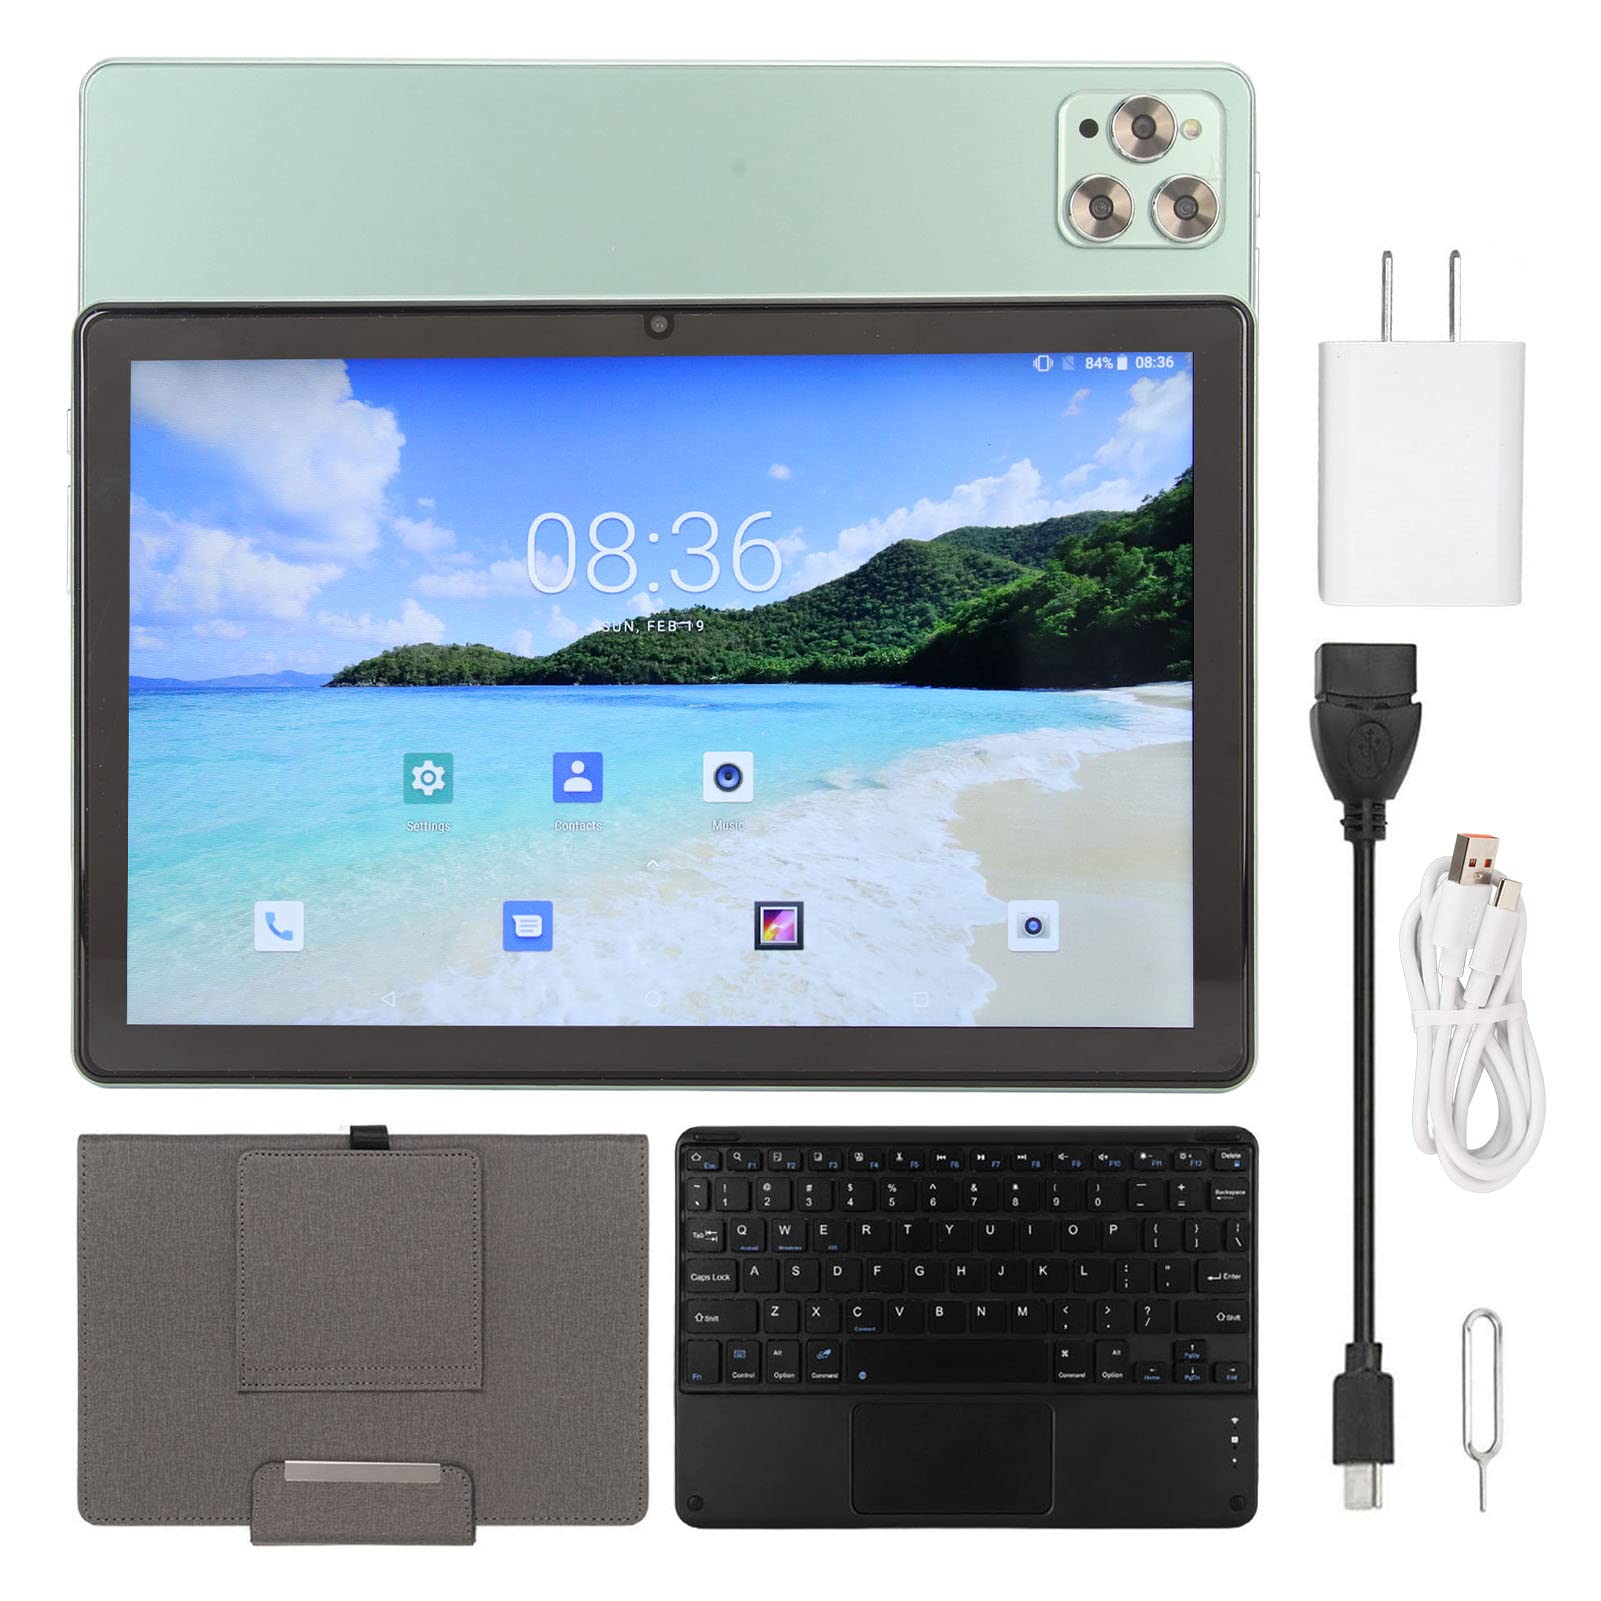 CUIFATI 10.1 Inch 2 in 1 Tablet 8GB RAM 256GB ROM Octa Core CPU 5G WiFi 4G LTE 1960x1080 Resolution 8MP Front 16MP Rear Dual Camera Tablet with Case Keyboard,Green (US Plug 110‑240V)